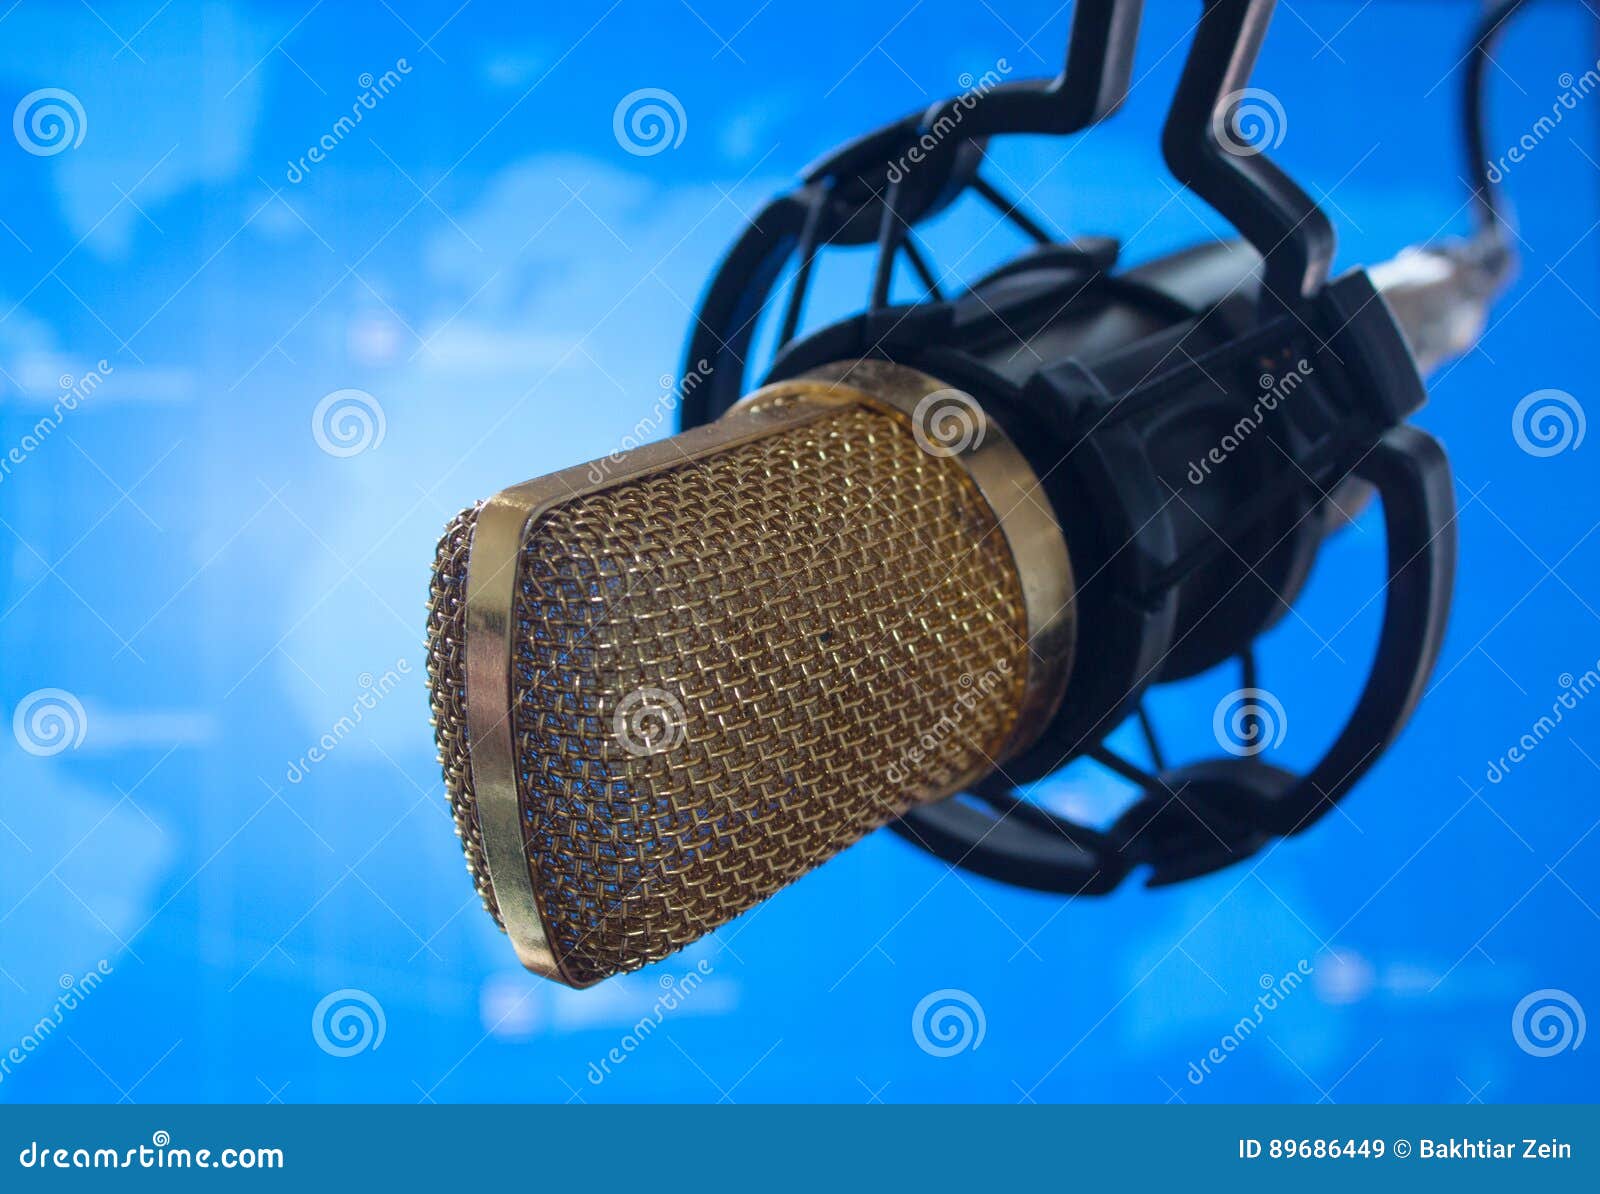 public relations pr microphone for news global map world press